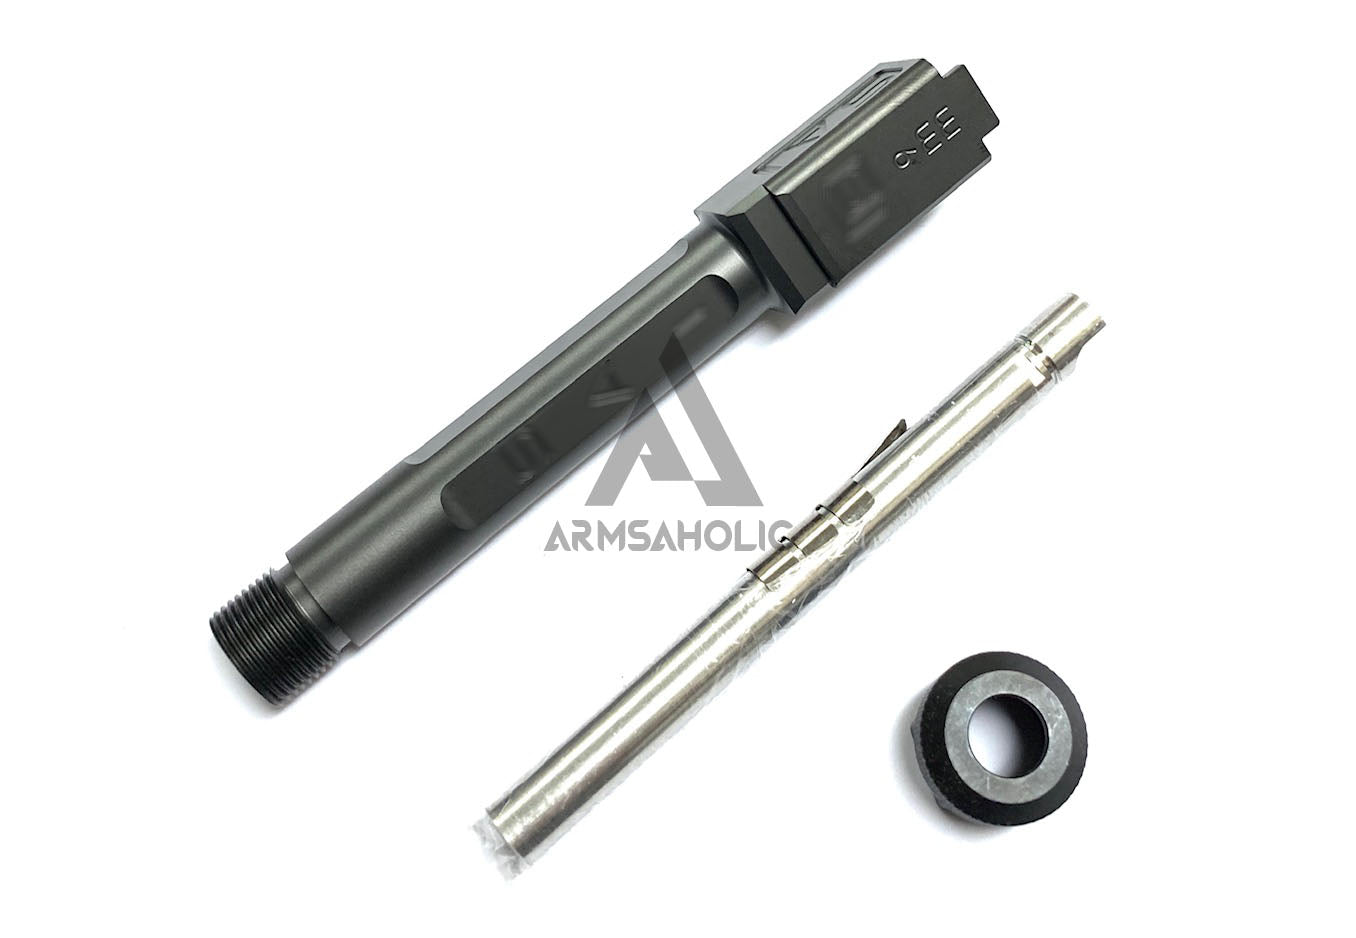 Guns Modify S-Style Stainless Steel Thread Outer Barrel for Marui G19 GBB (Nitride Black) CCW 14MM